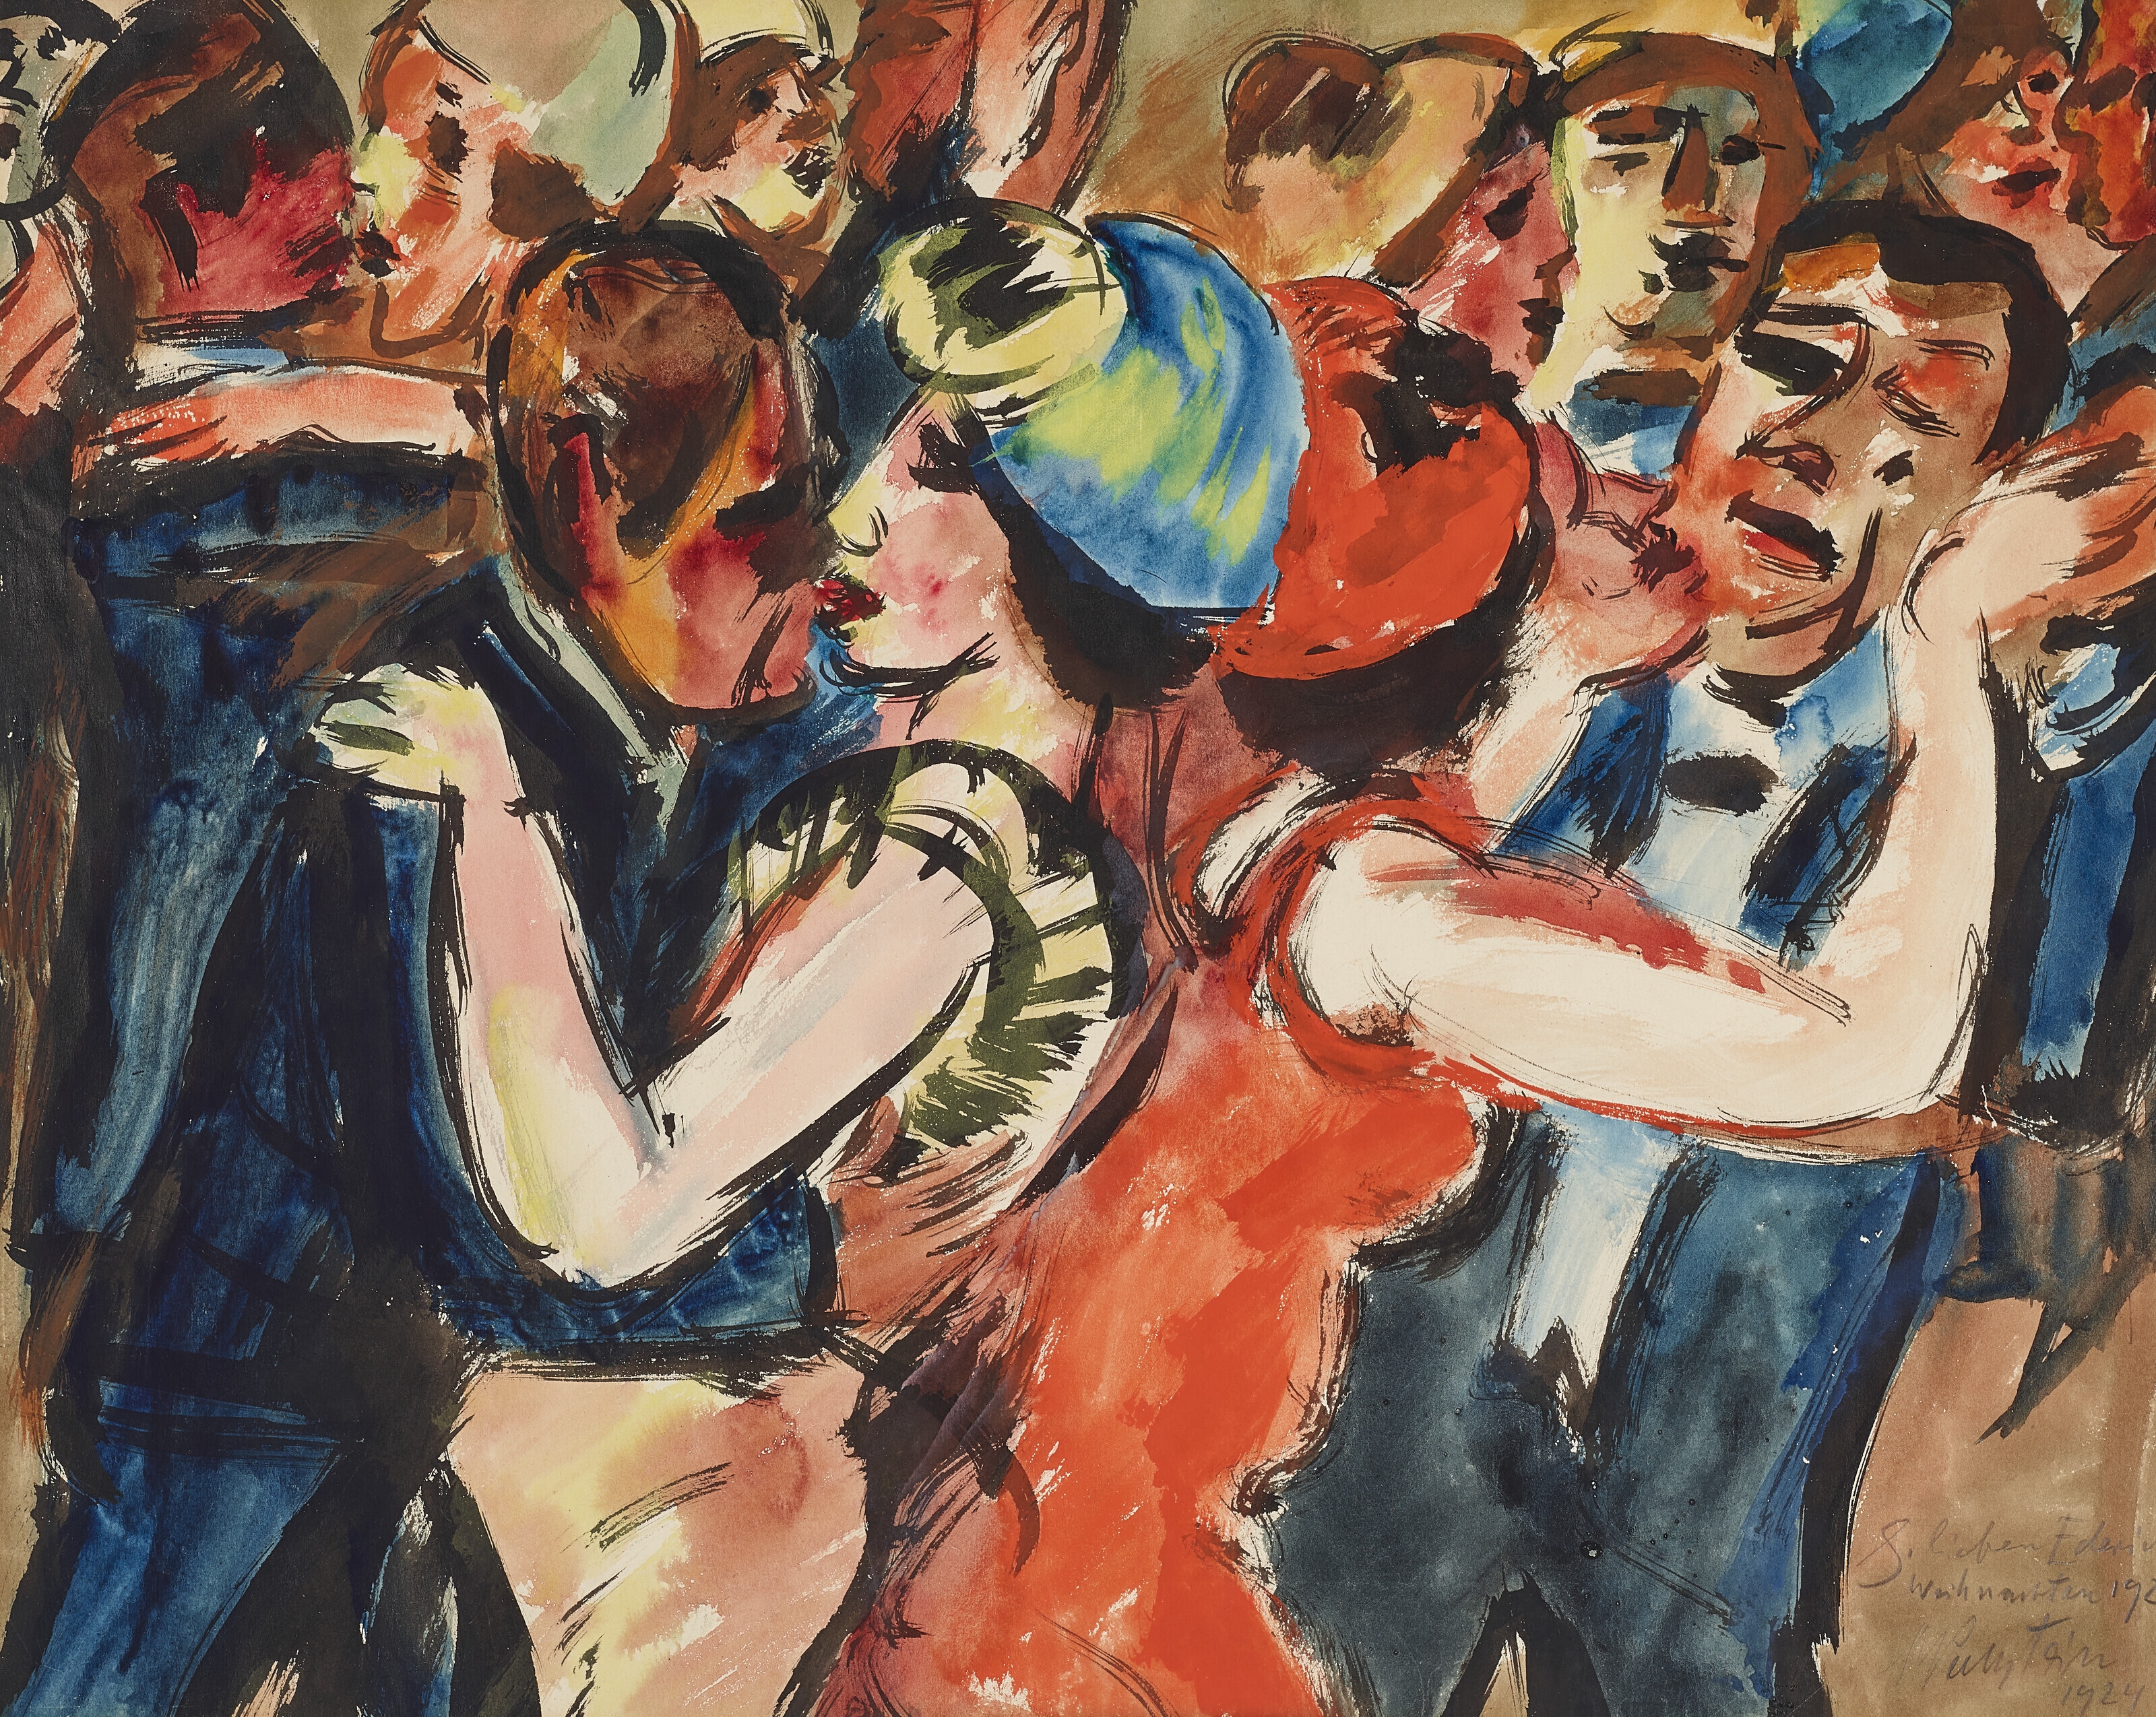 Artwork by Max Pechstein, Beim Tanz 1 (Tanzparty 1), Made of gouache, watercolor and brush and black ink on paper